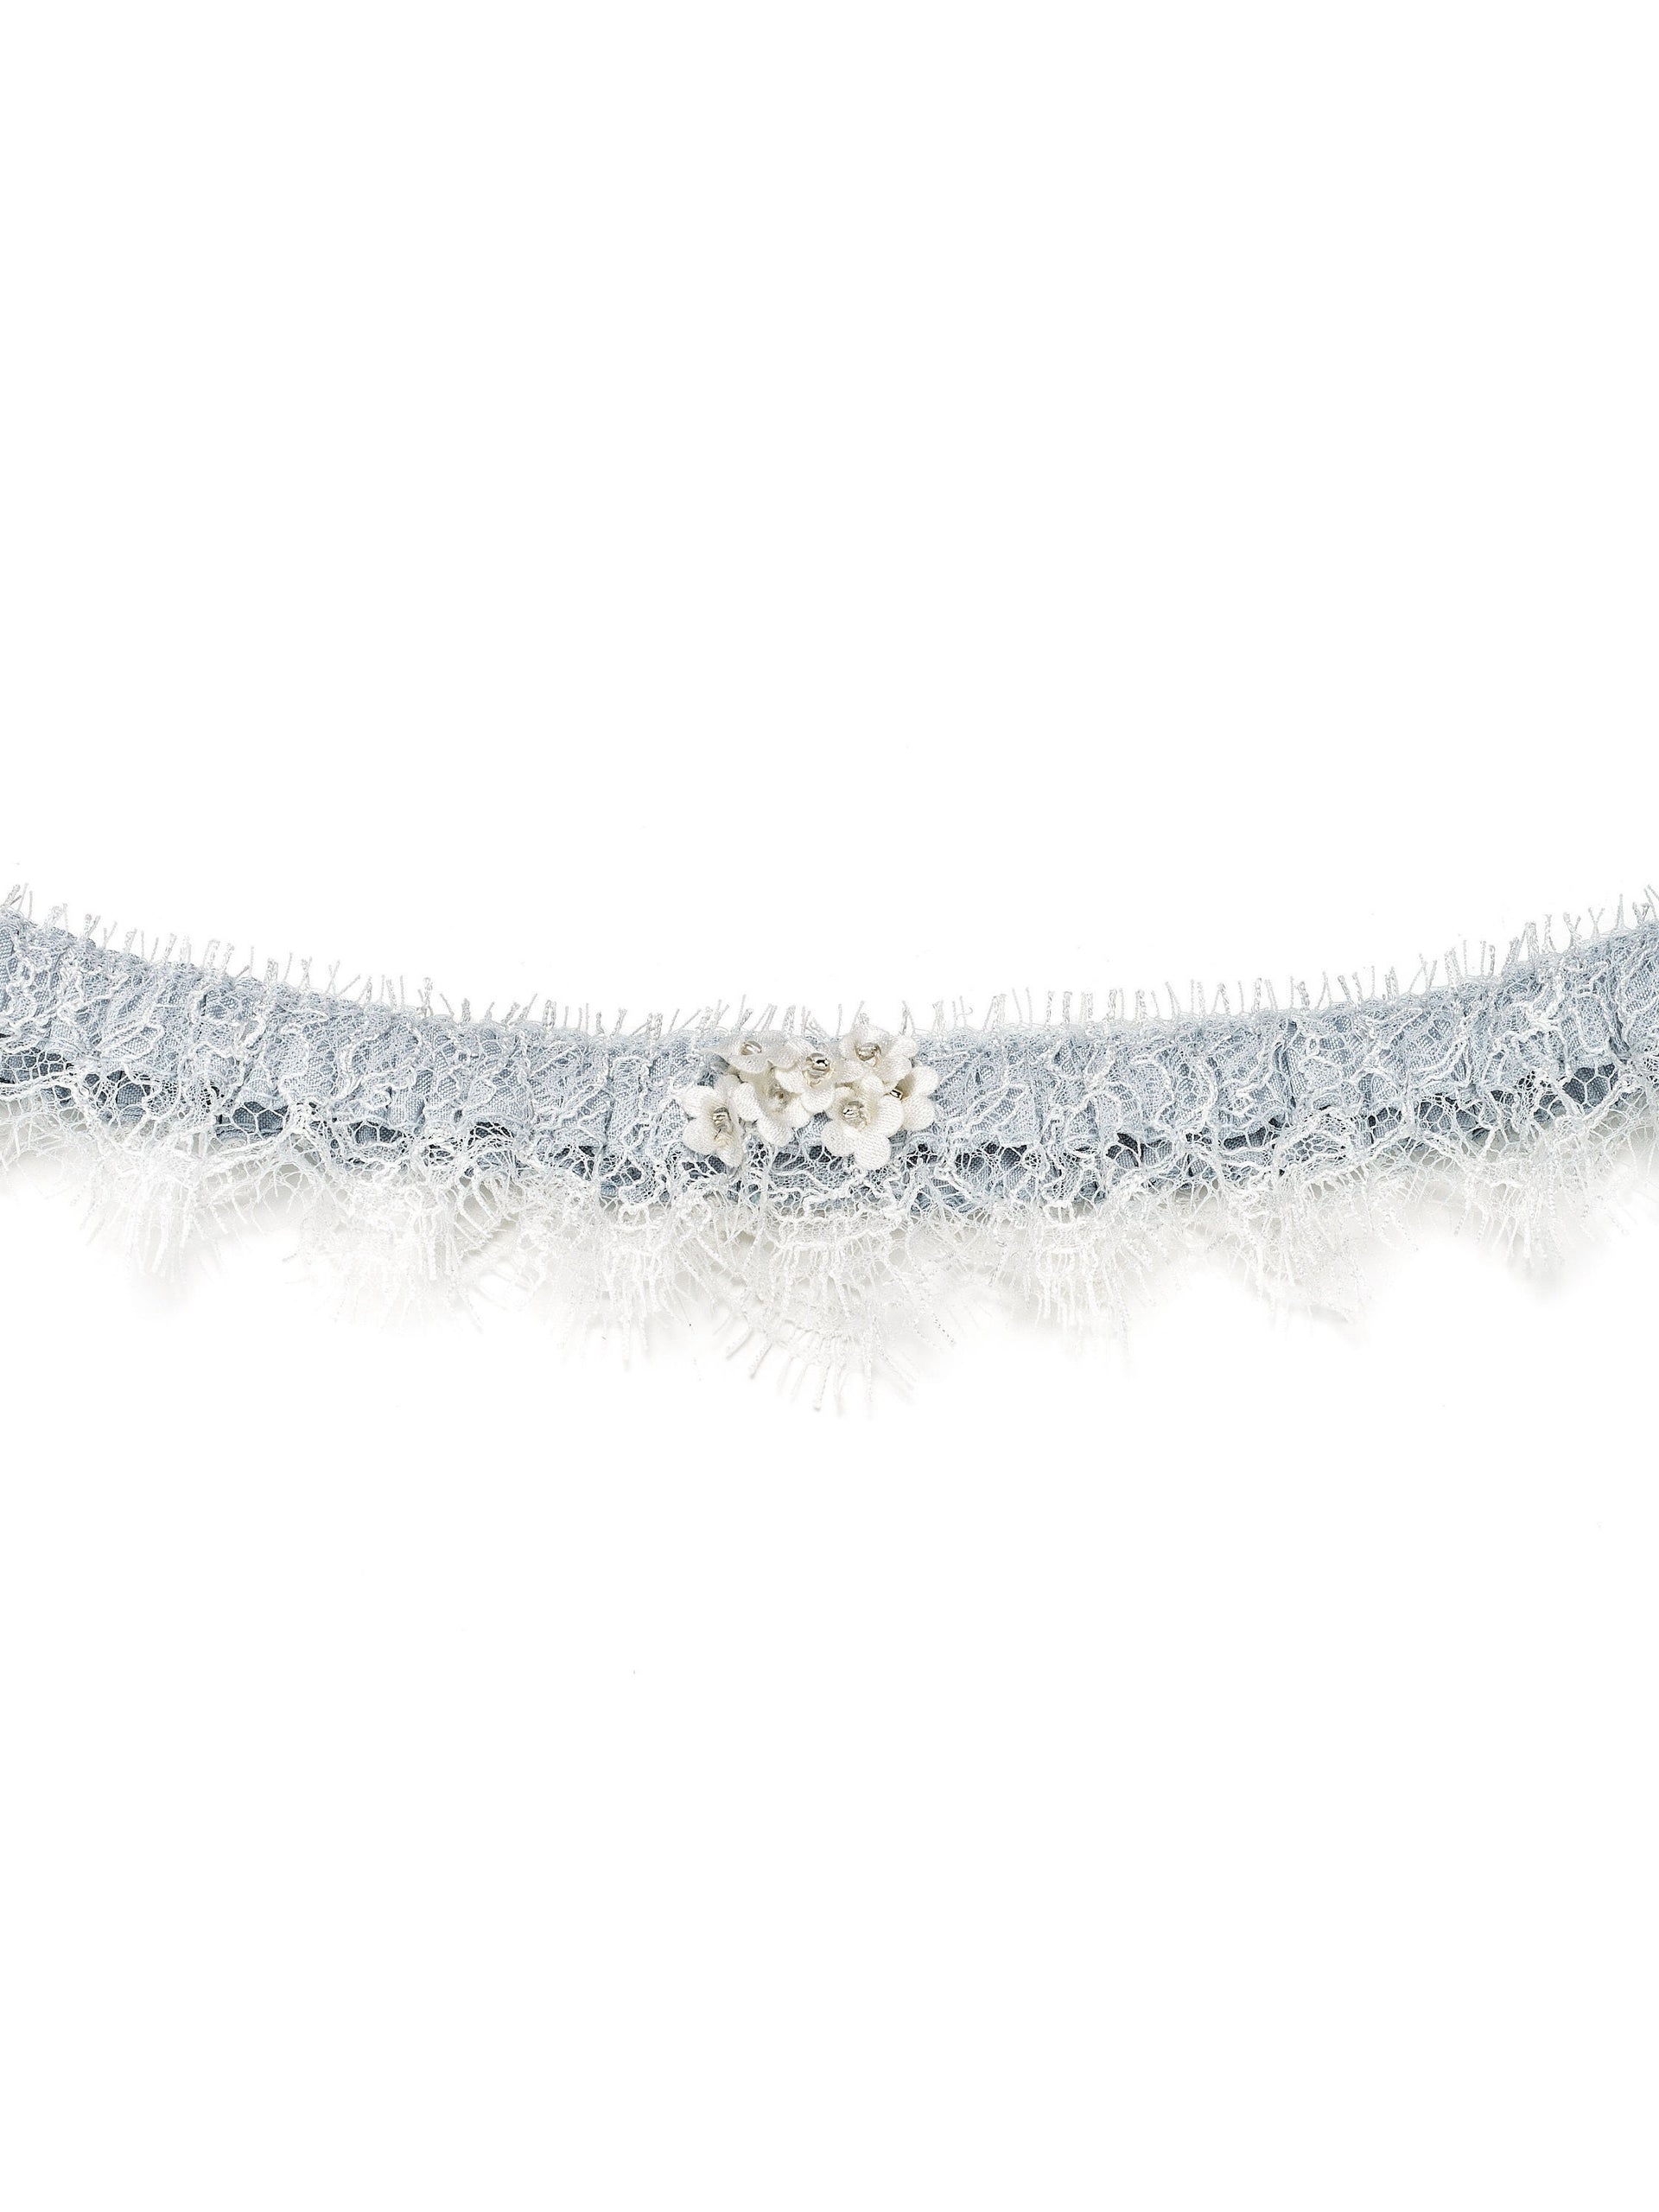 Blue silk lace wedding garters, made in the UK